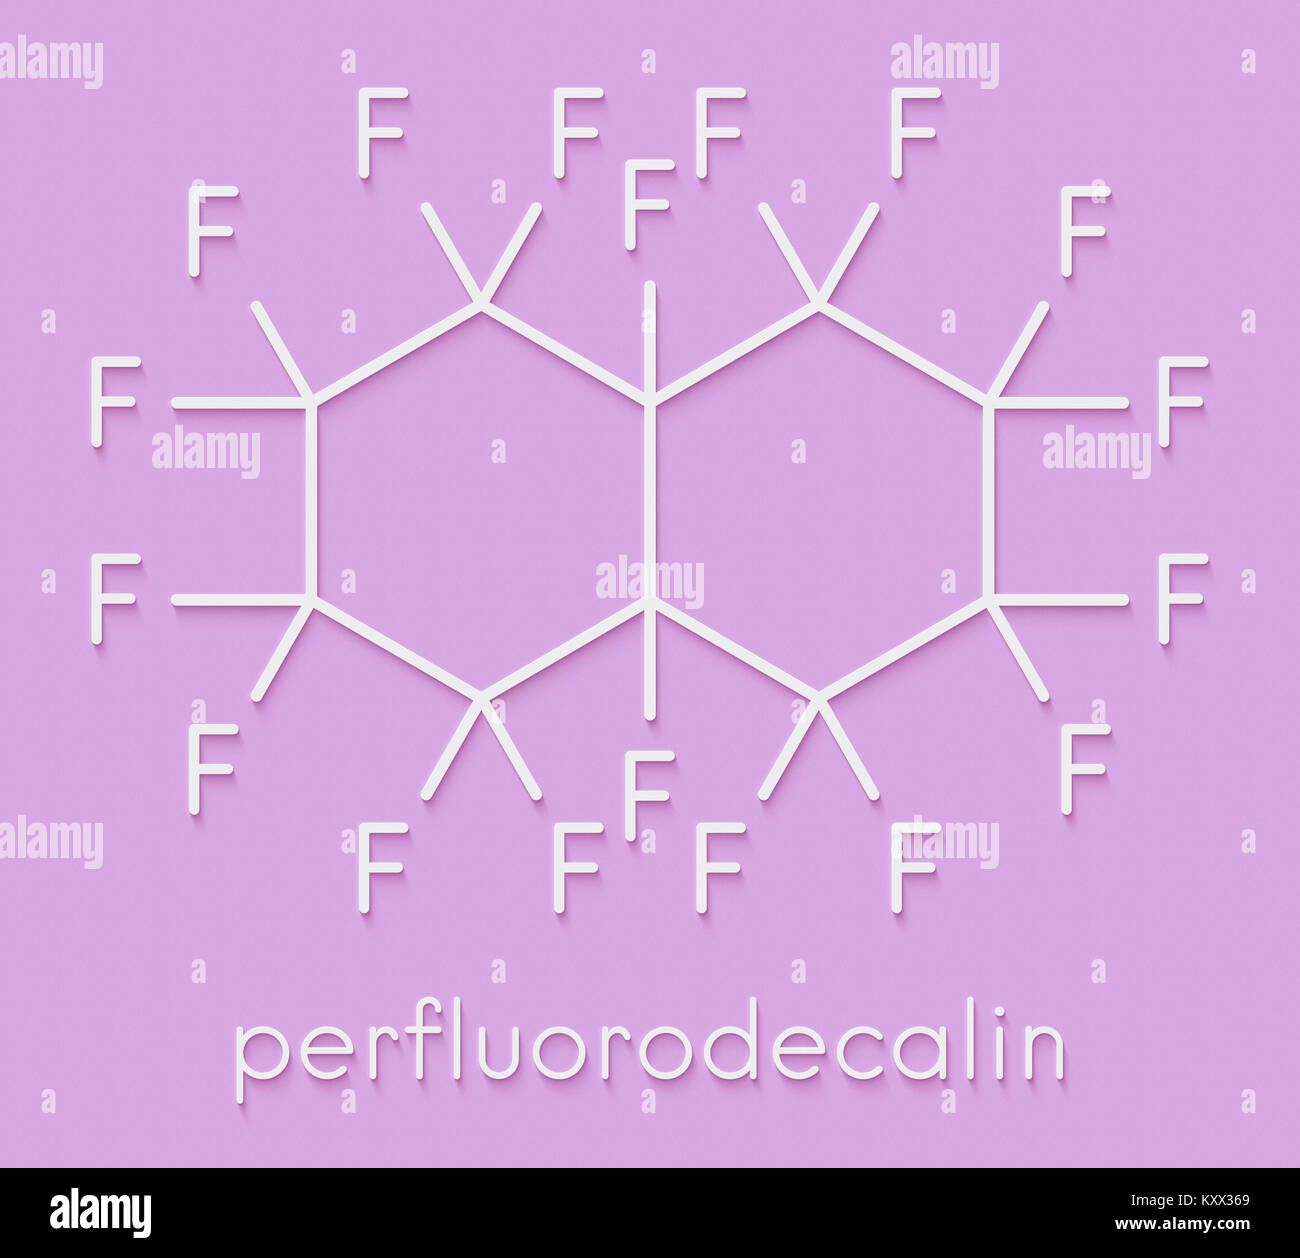 Perfluorodecalin fluorocarbon molecule. Used as component of artificial  blood and for liquid breathing. Skeletal formula Stock Photo - Alamy